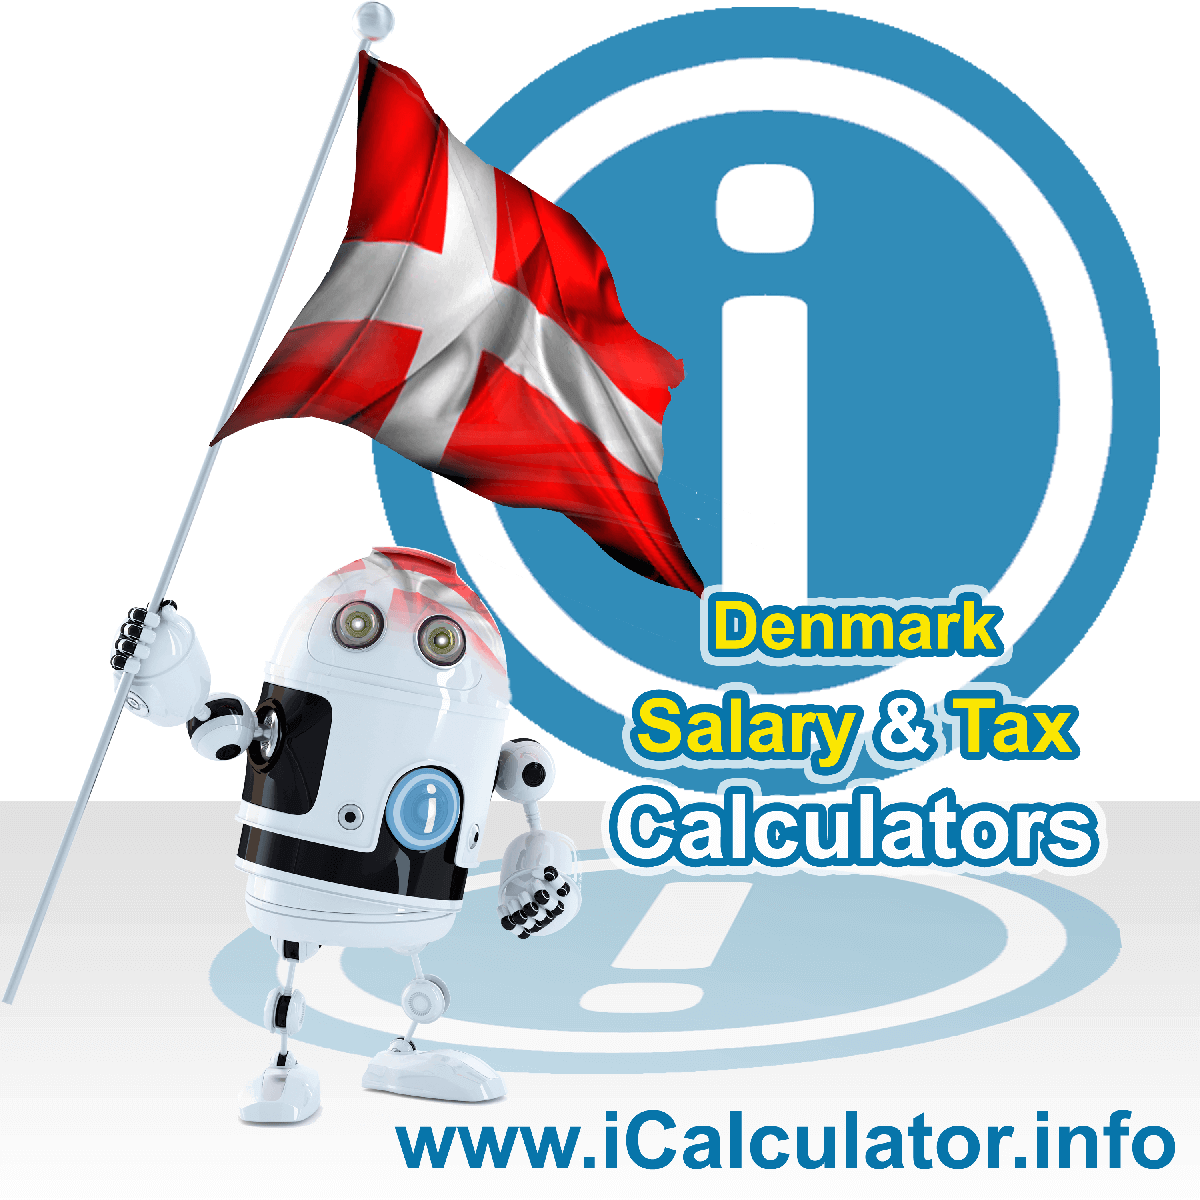 Denmark Tax Calculator. This image shows the Denmark flag and information relating to the tax formula for the Denmark Salary Calculator